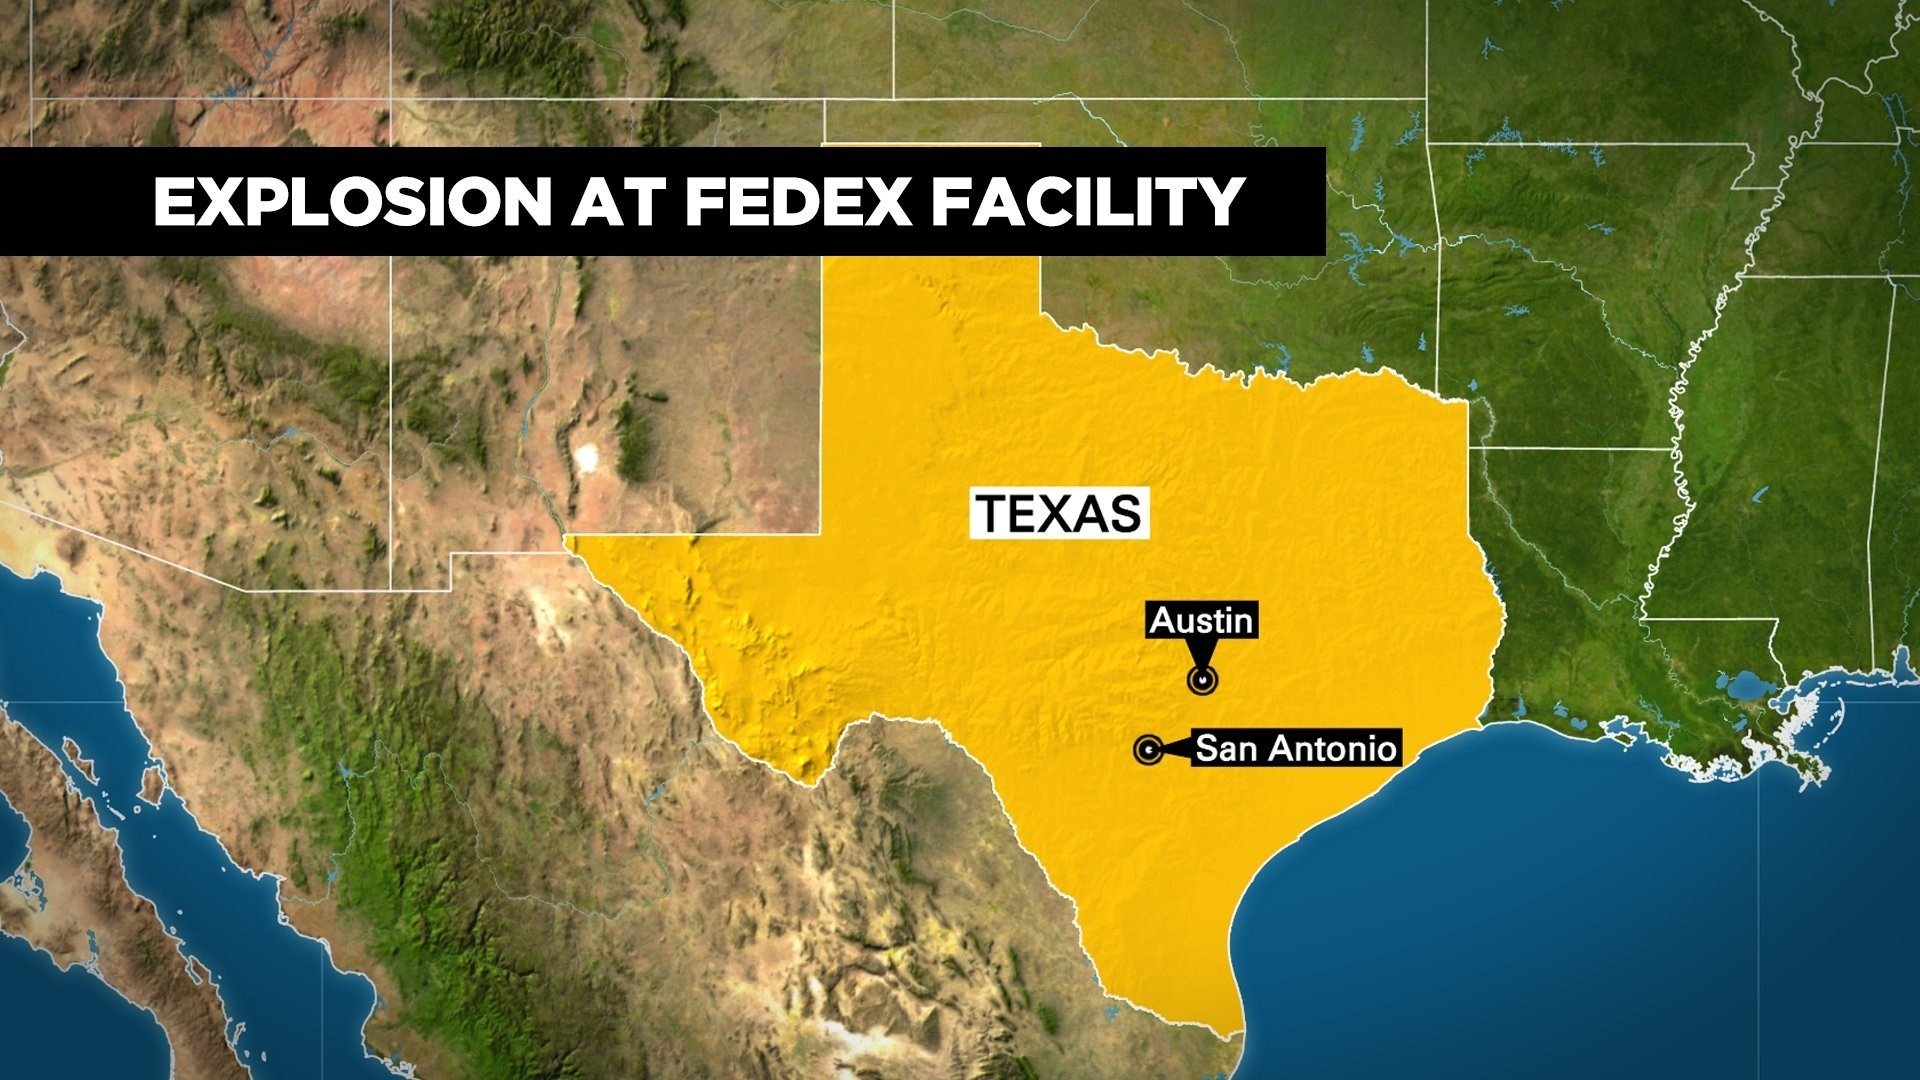 2Nd suspicious package found at FedEx after blast, police chief and FedEx say